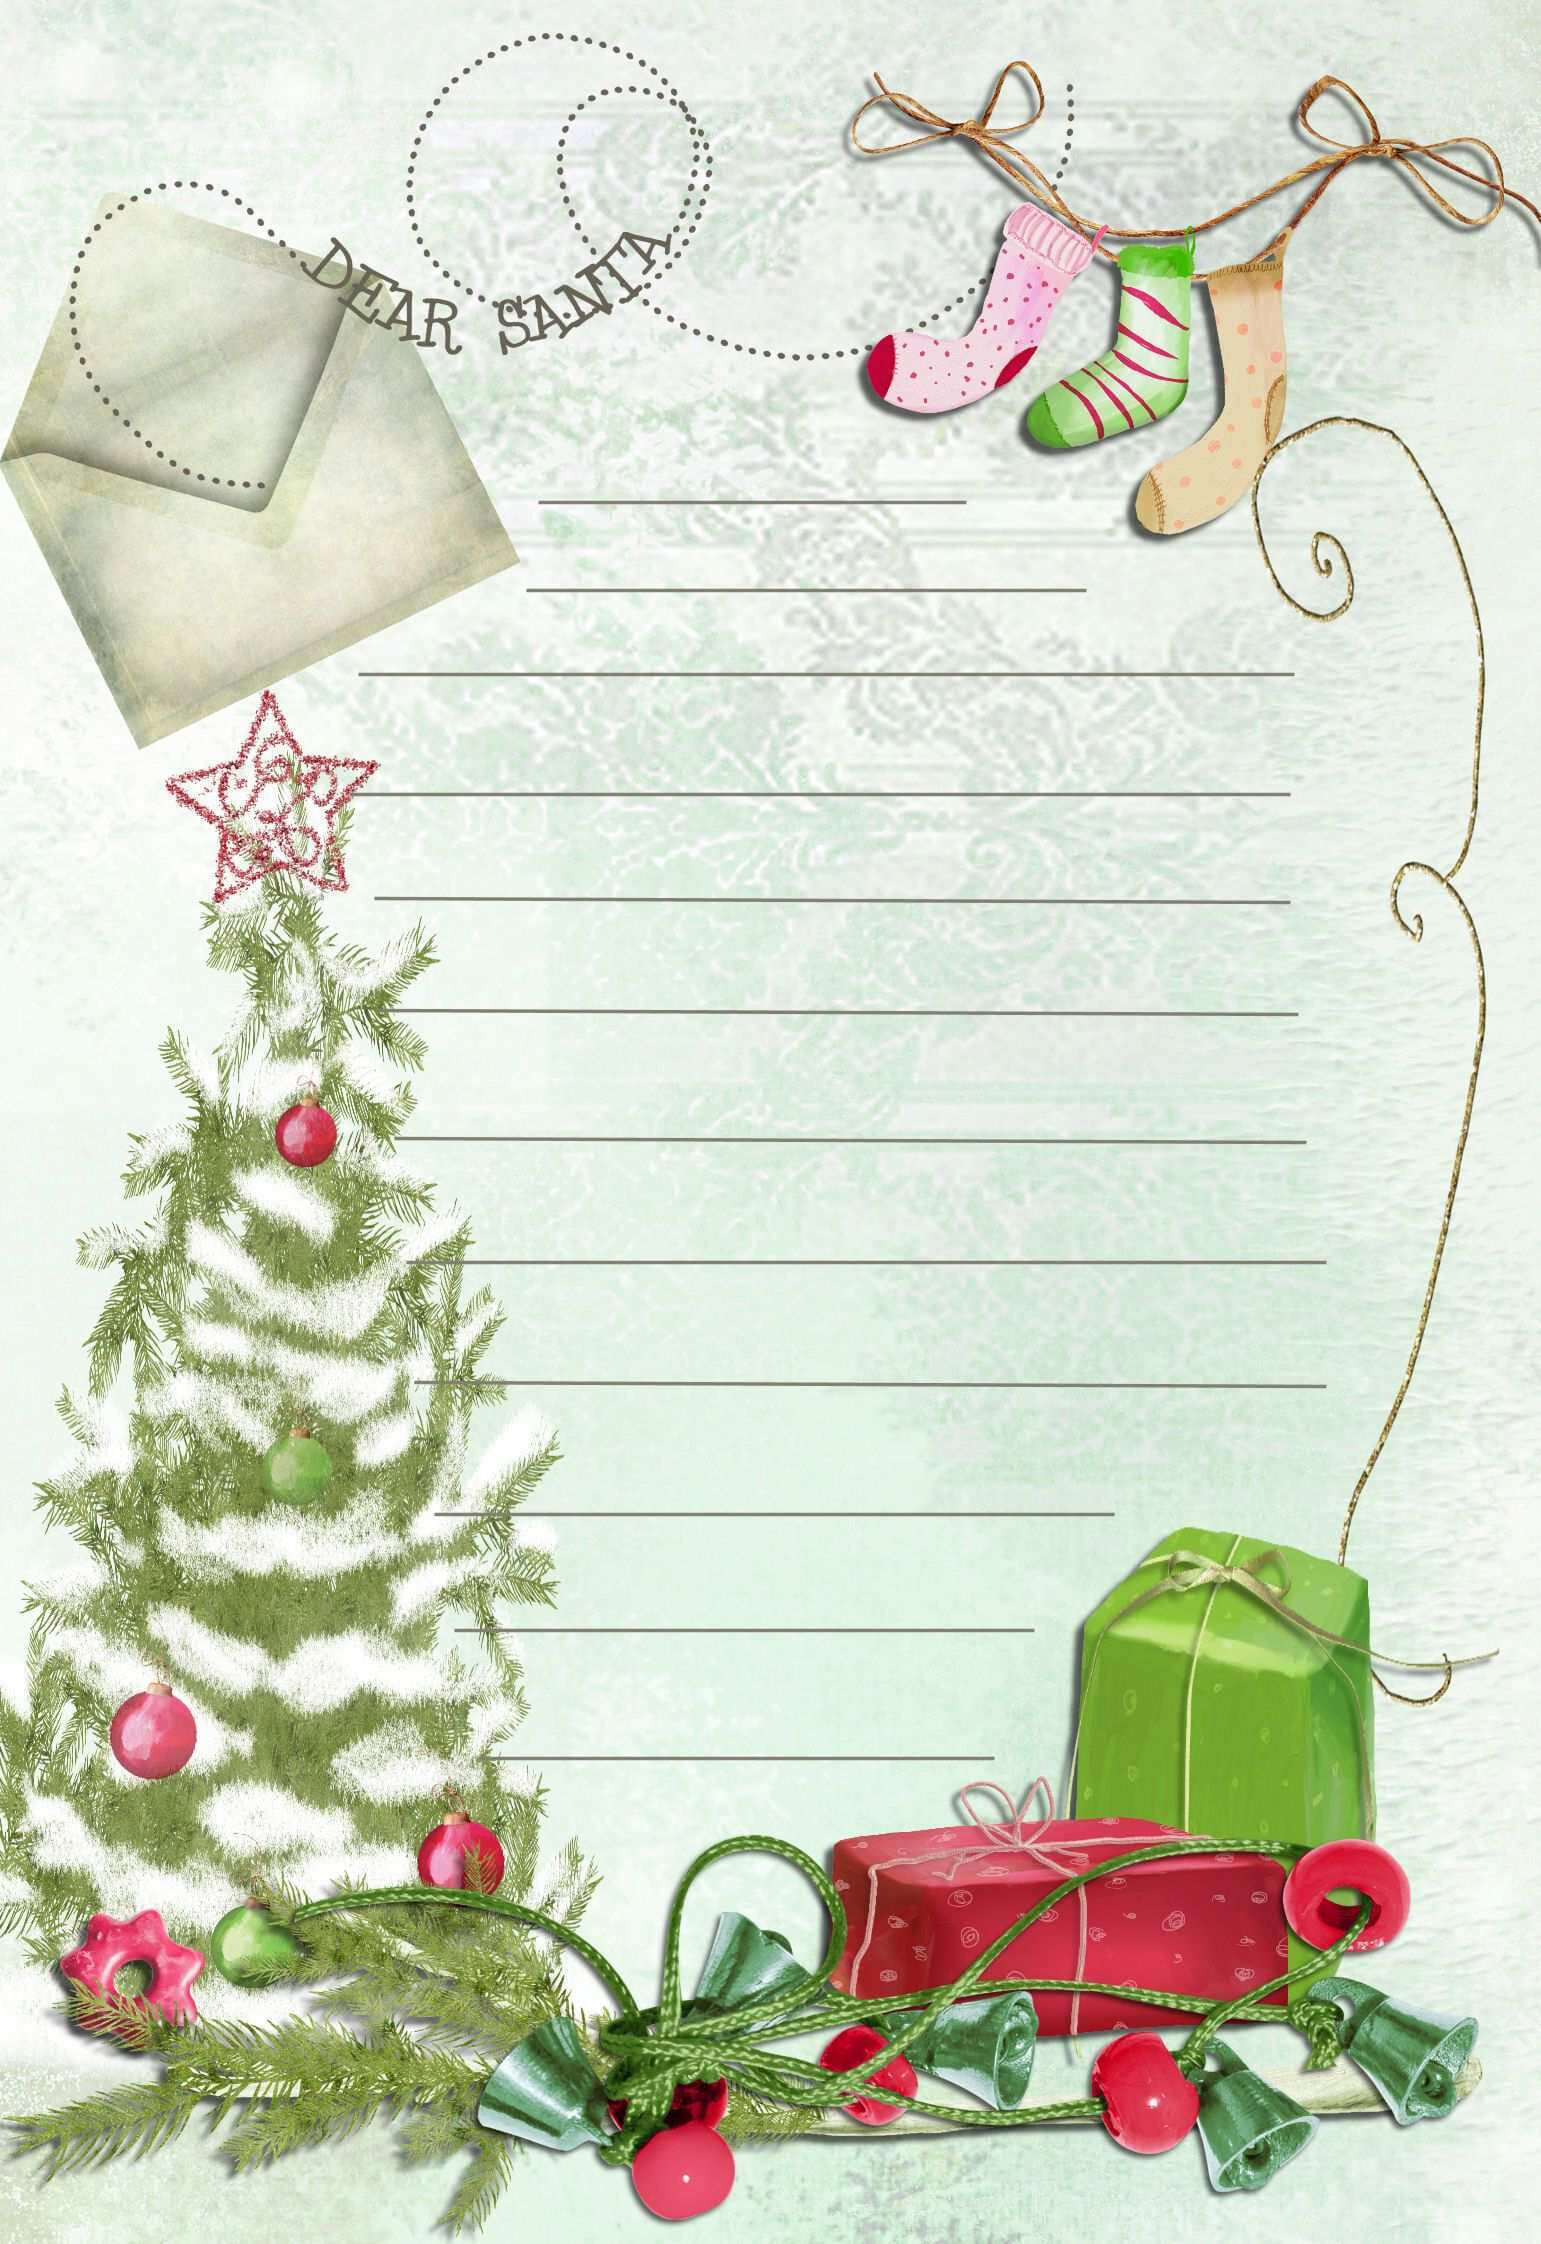 Christmas Card Note Template – Cards Design Templates Regarding Christmas Note Card Templates